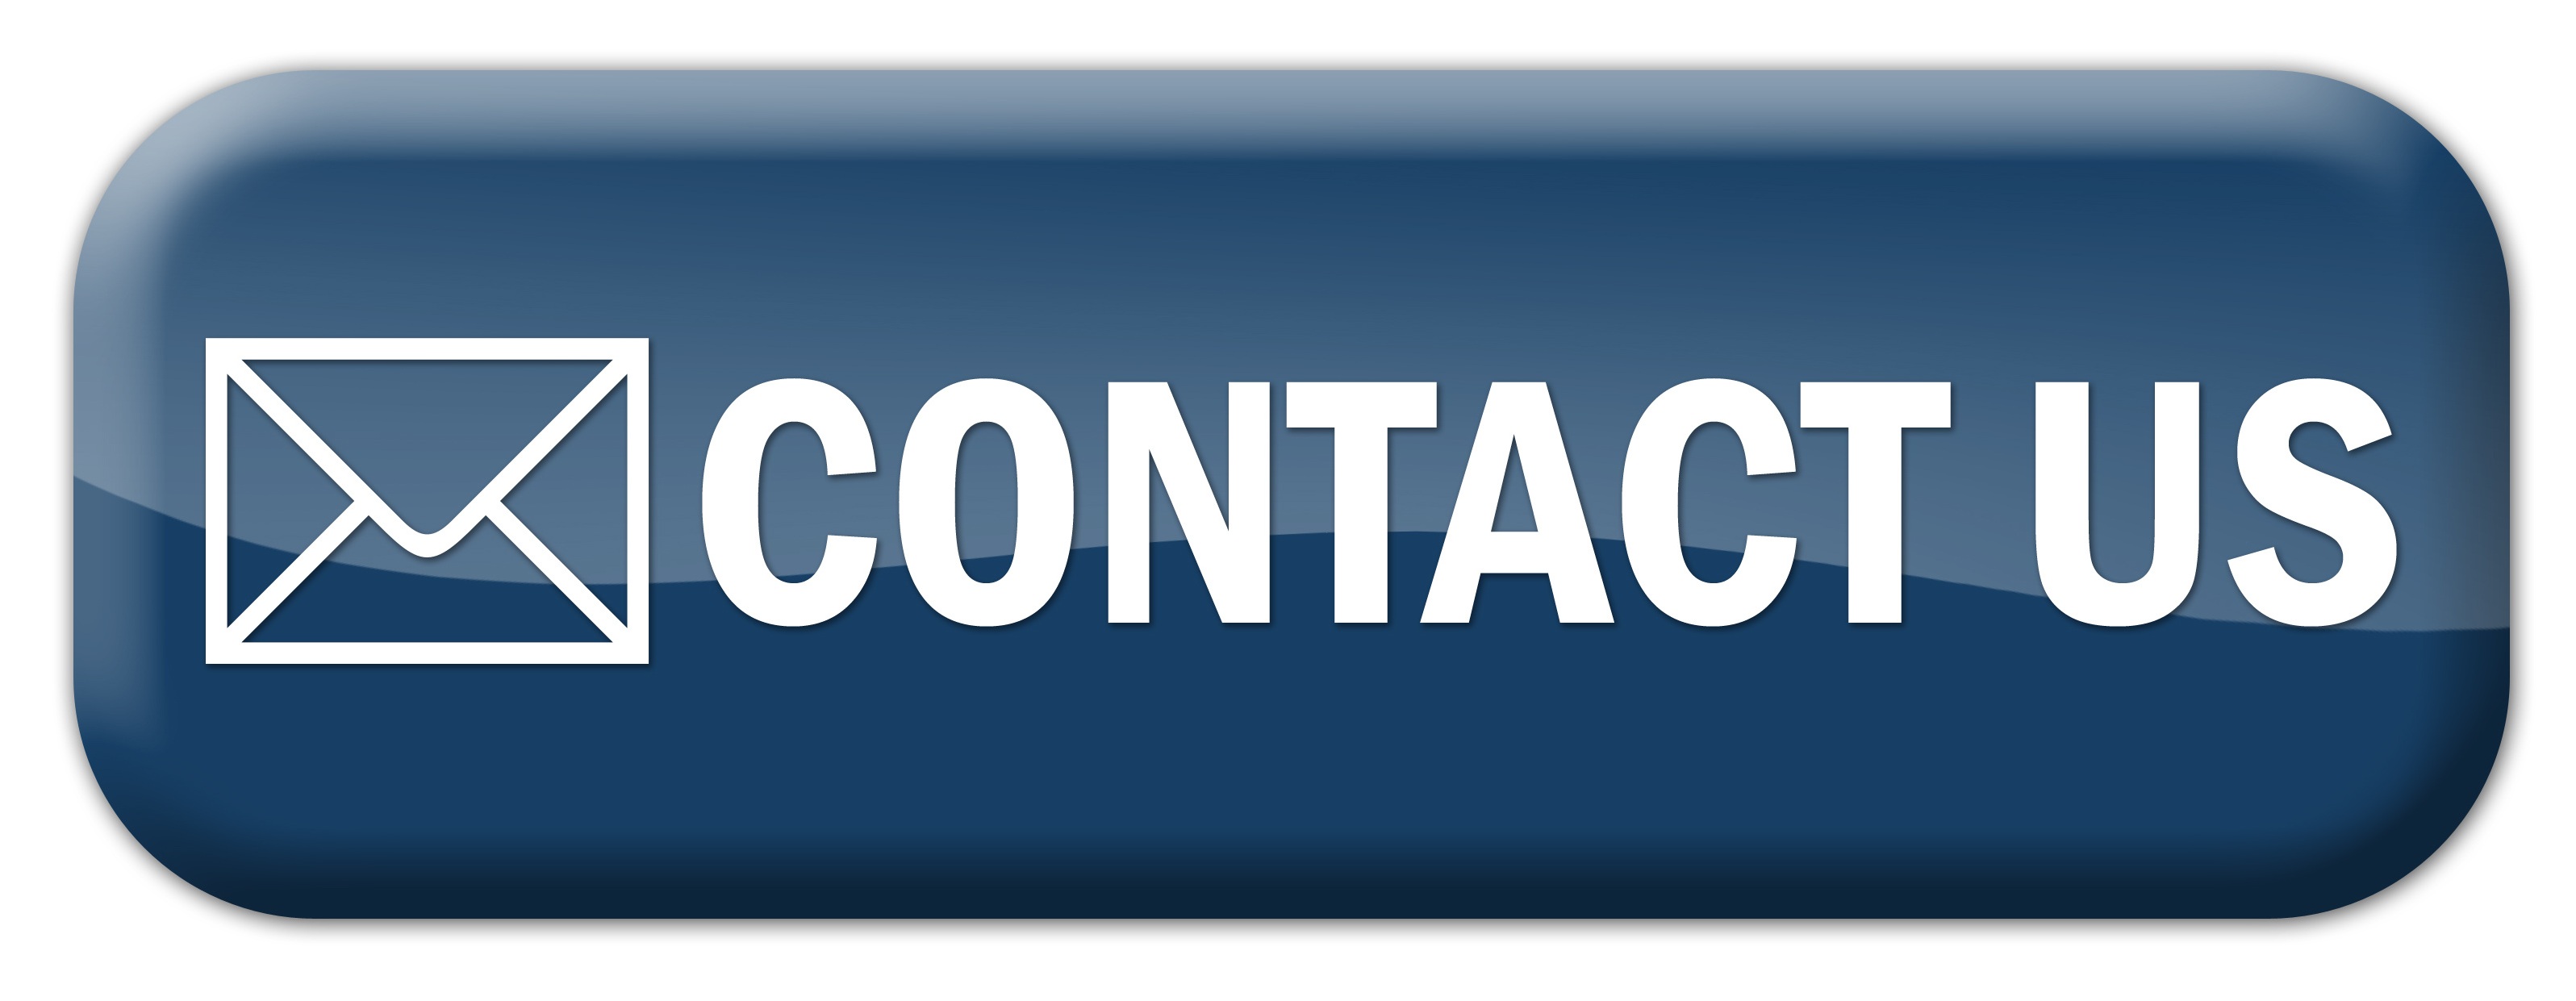 16 Contact Us Icon Button Images - Contact Us Email Button, Email